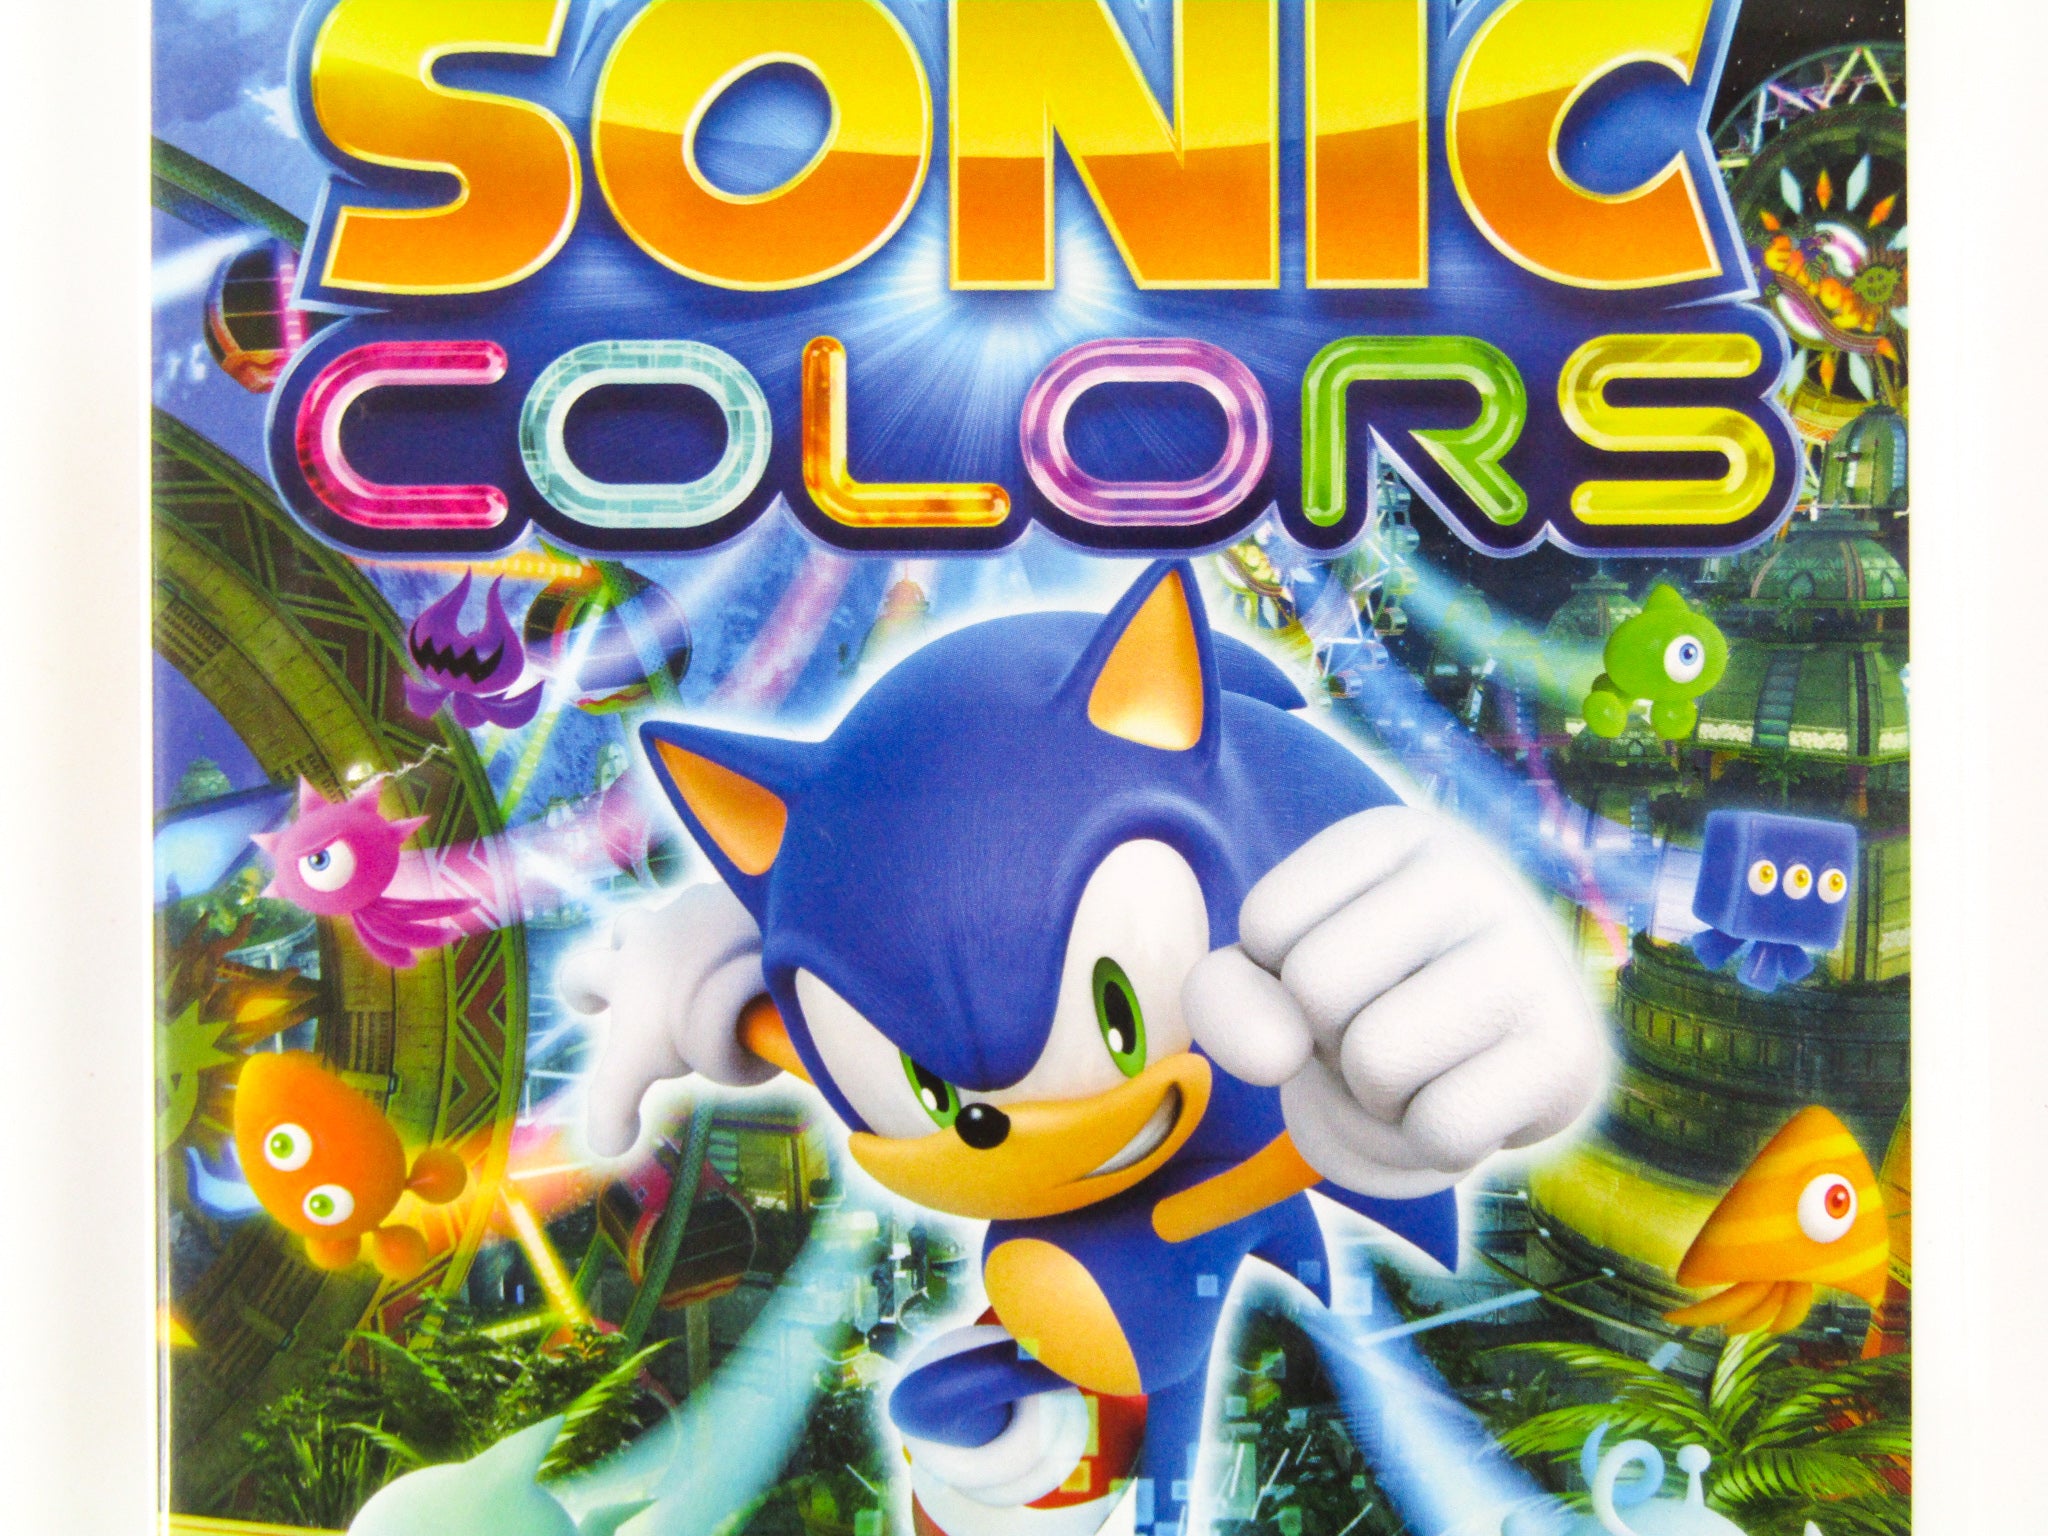 Sonic Colors - Nintendo Wii Pristine Authentic Tested Game 180 Day  Guarantee